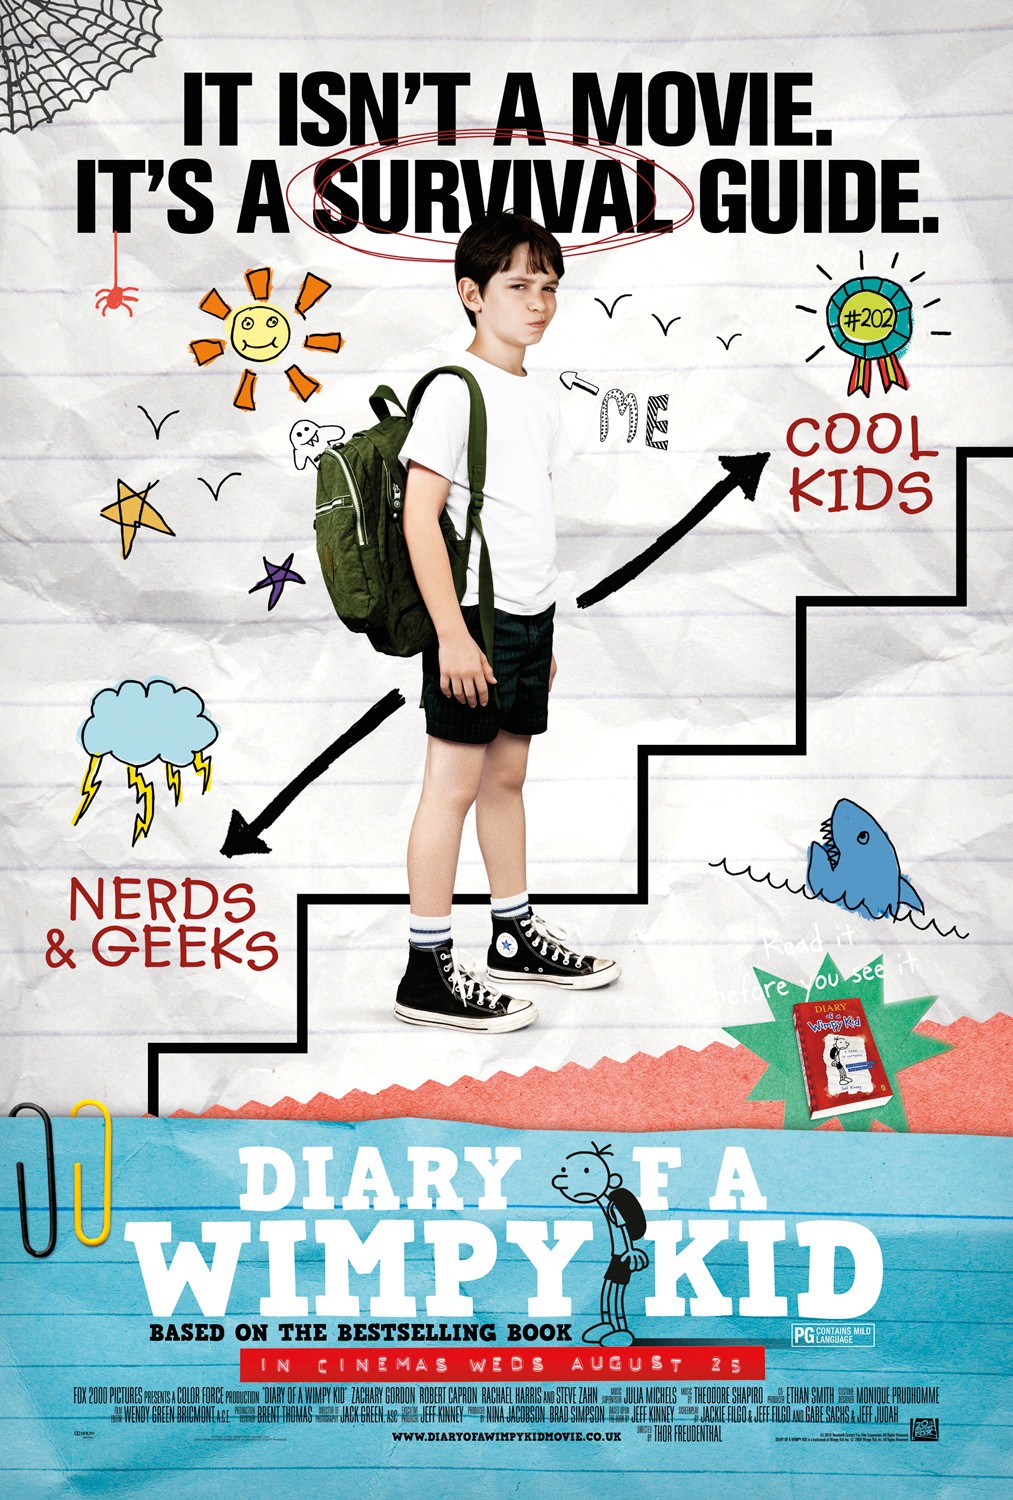 Extra Large Movie Poster Image for Diary of a Wimpy Kid (#8 of 9)